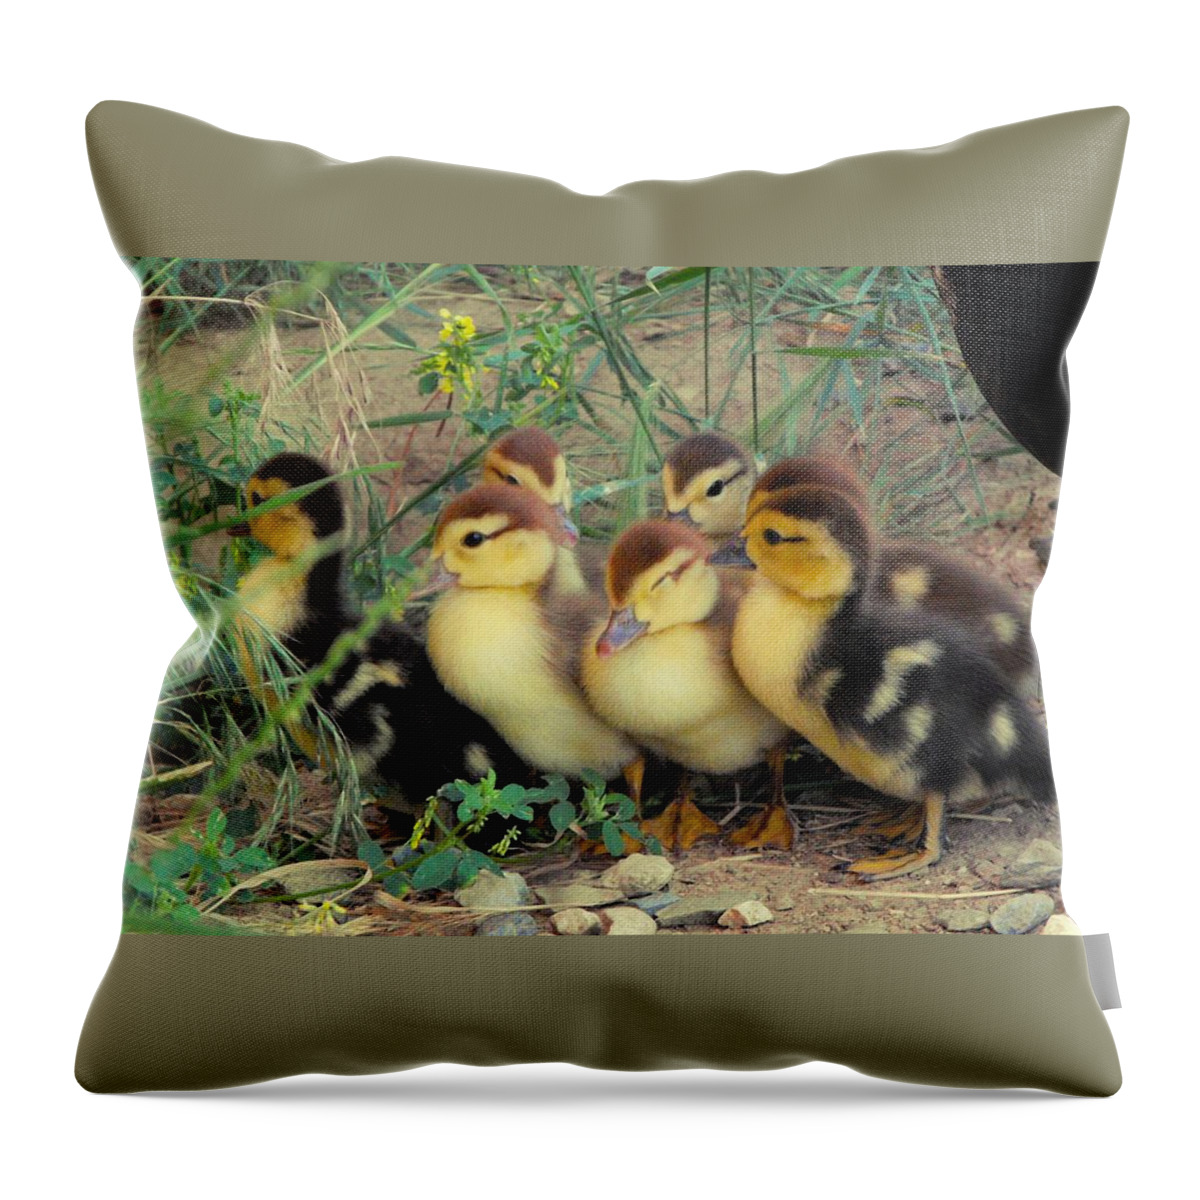 Nature Throw Pillow featuring the photograph Ducklings by Kae Cheatham